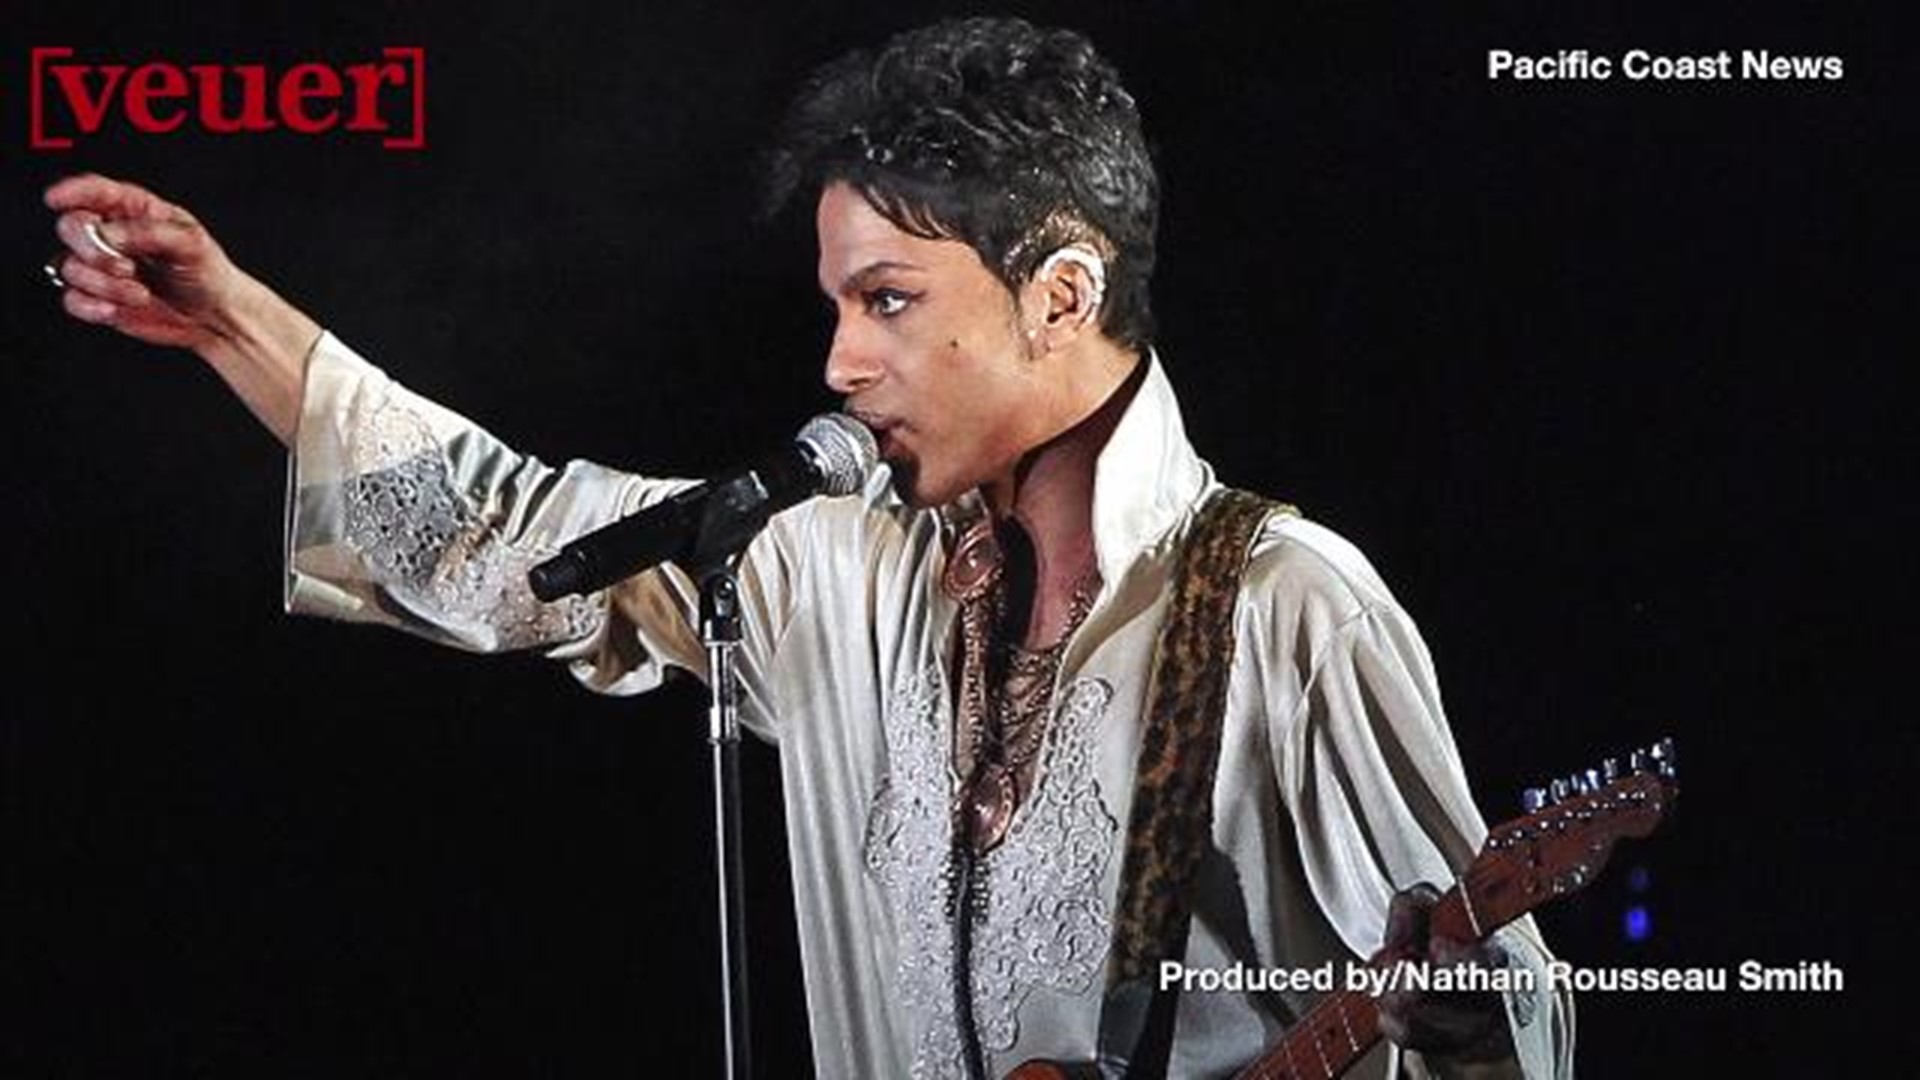 We're learning more about the drugs that were found in Prince's body, which took the life of the 'Purple Rain' singer all too soon. Nathan Rousseau Smith has the story.